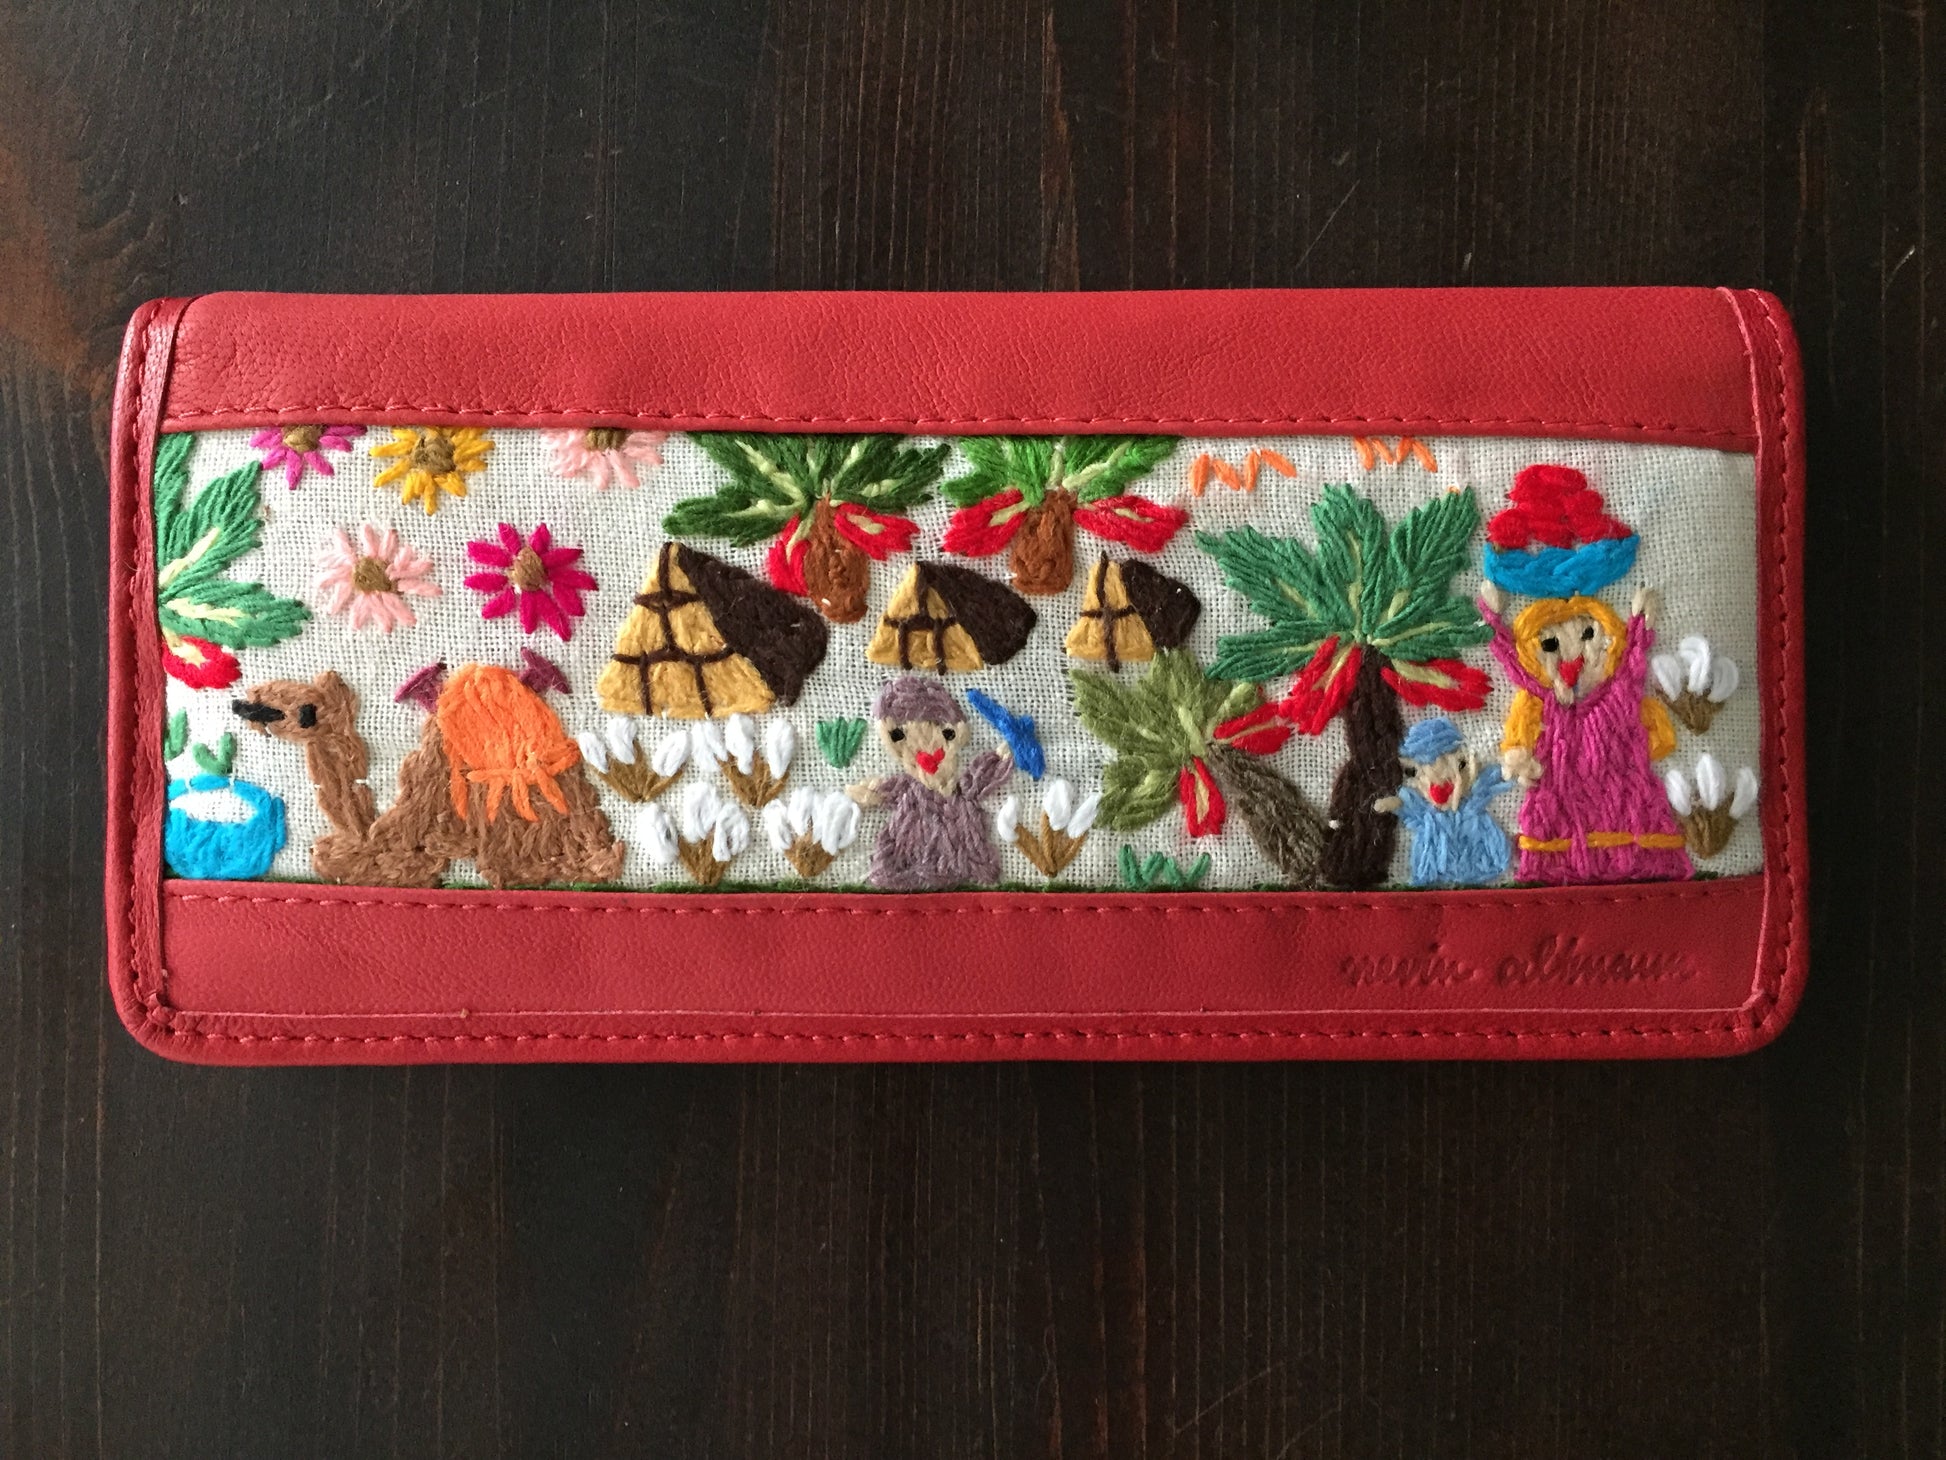 Handmade Leather Wallet with Hand Embroidery - Medium - Dandarah